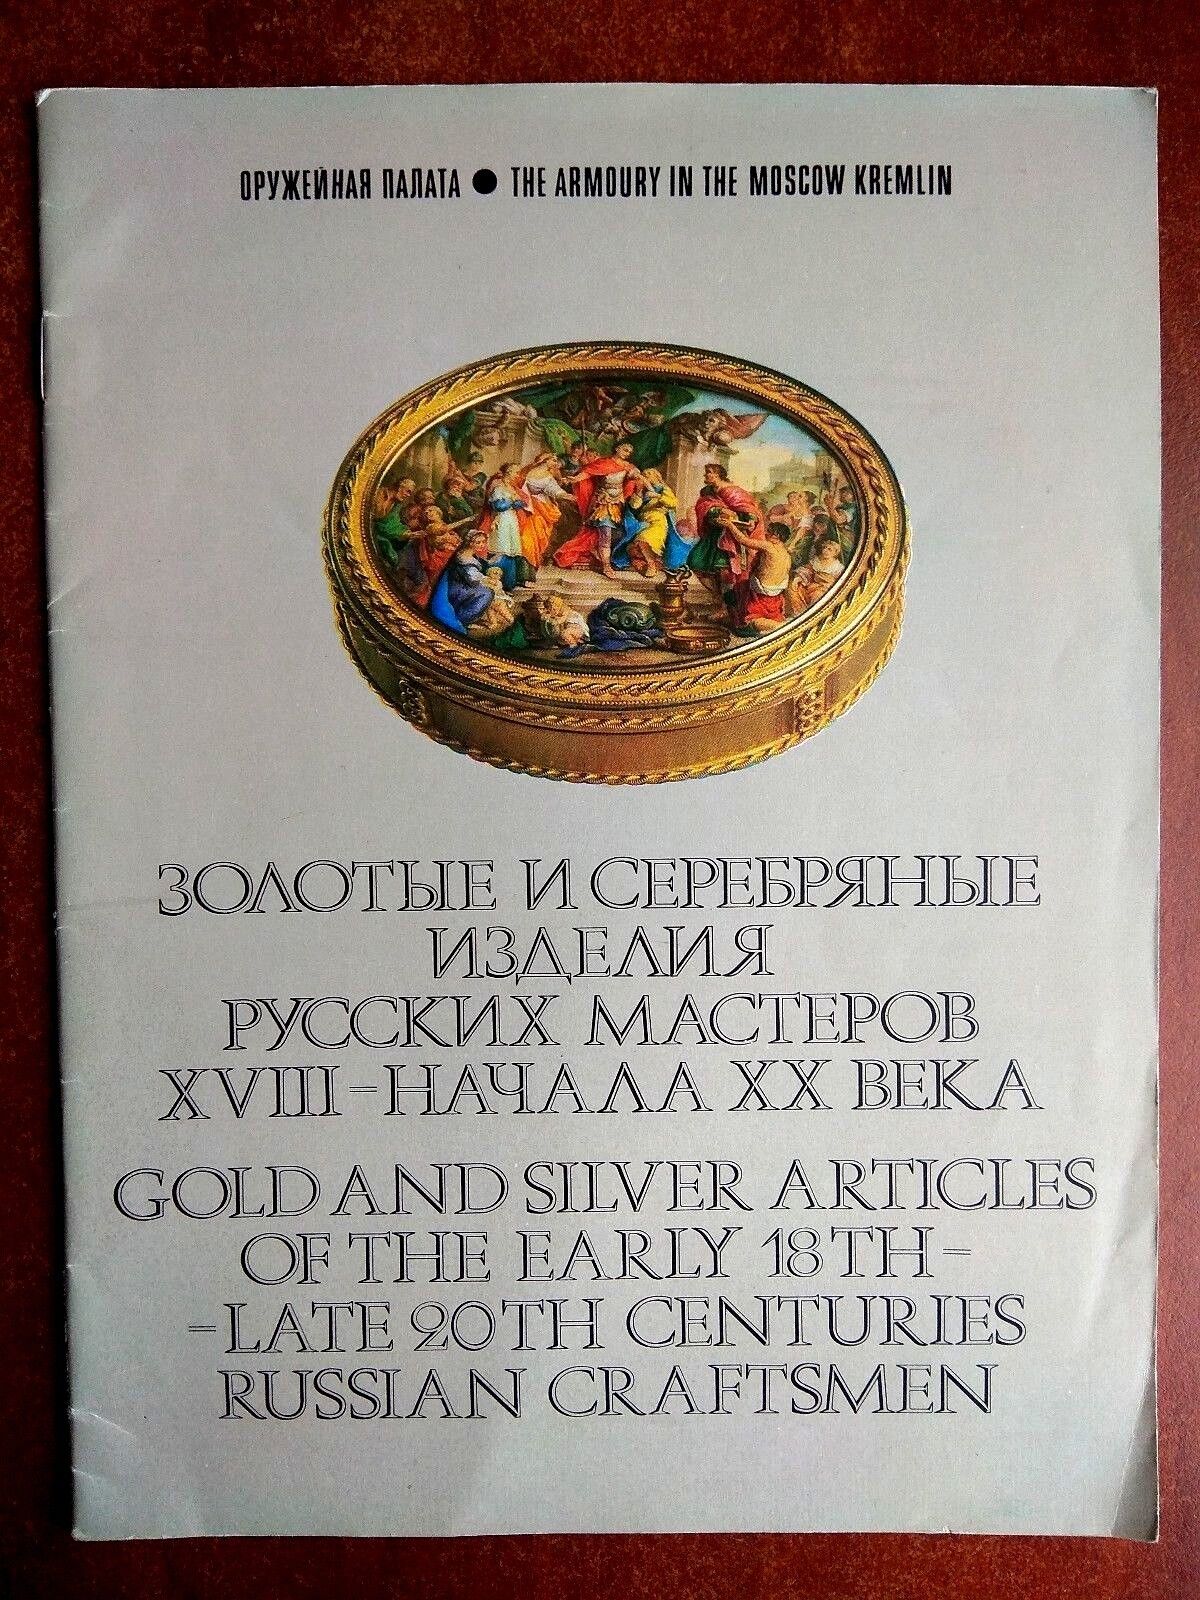 1981 USSR Russian book Gold and silver articles of Russian craftsmen Illustrated